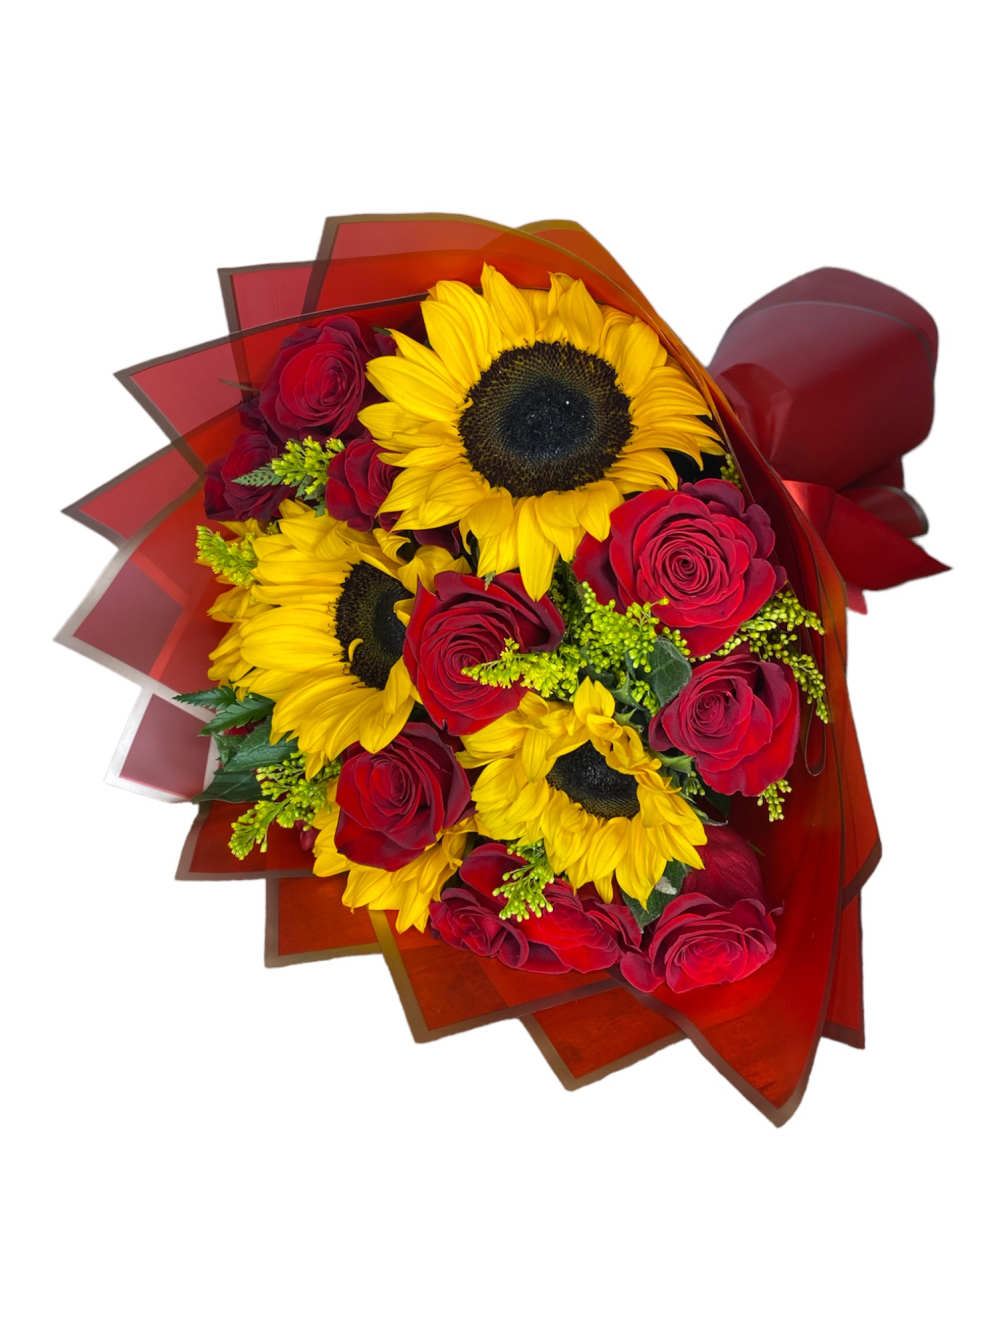 Standard- 12 Red roses with 5 Sunflowers 
Deluxe- 14 Red Roses with